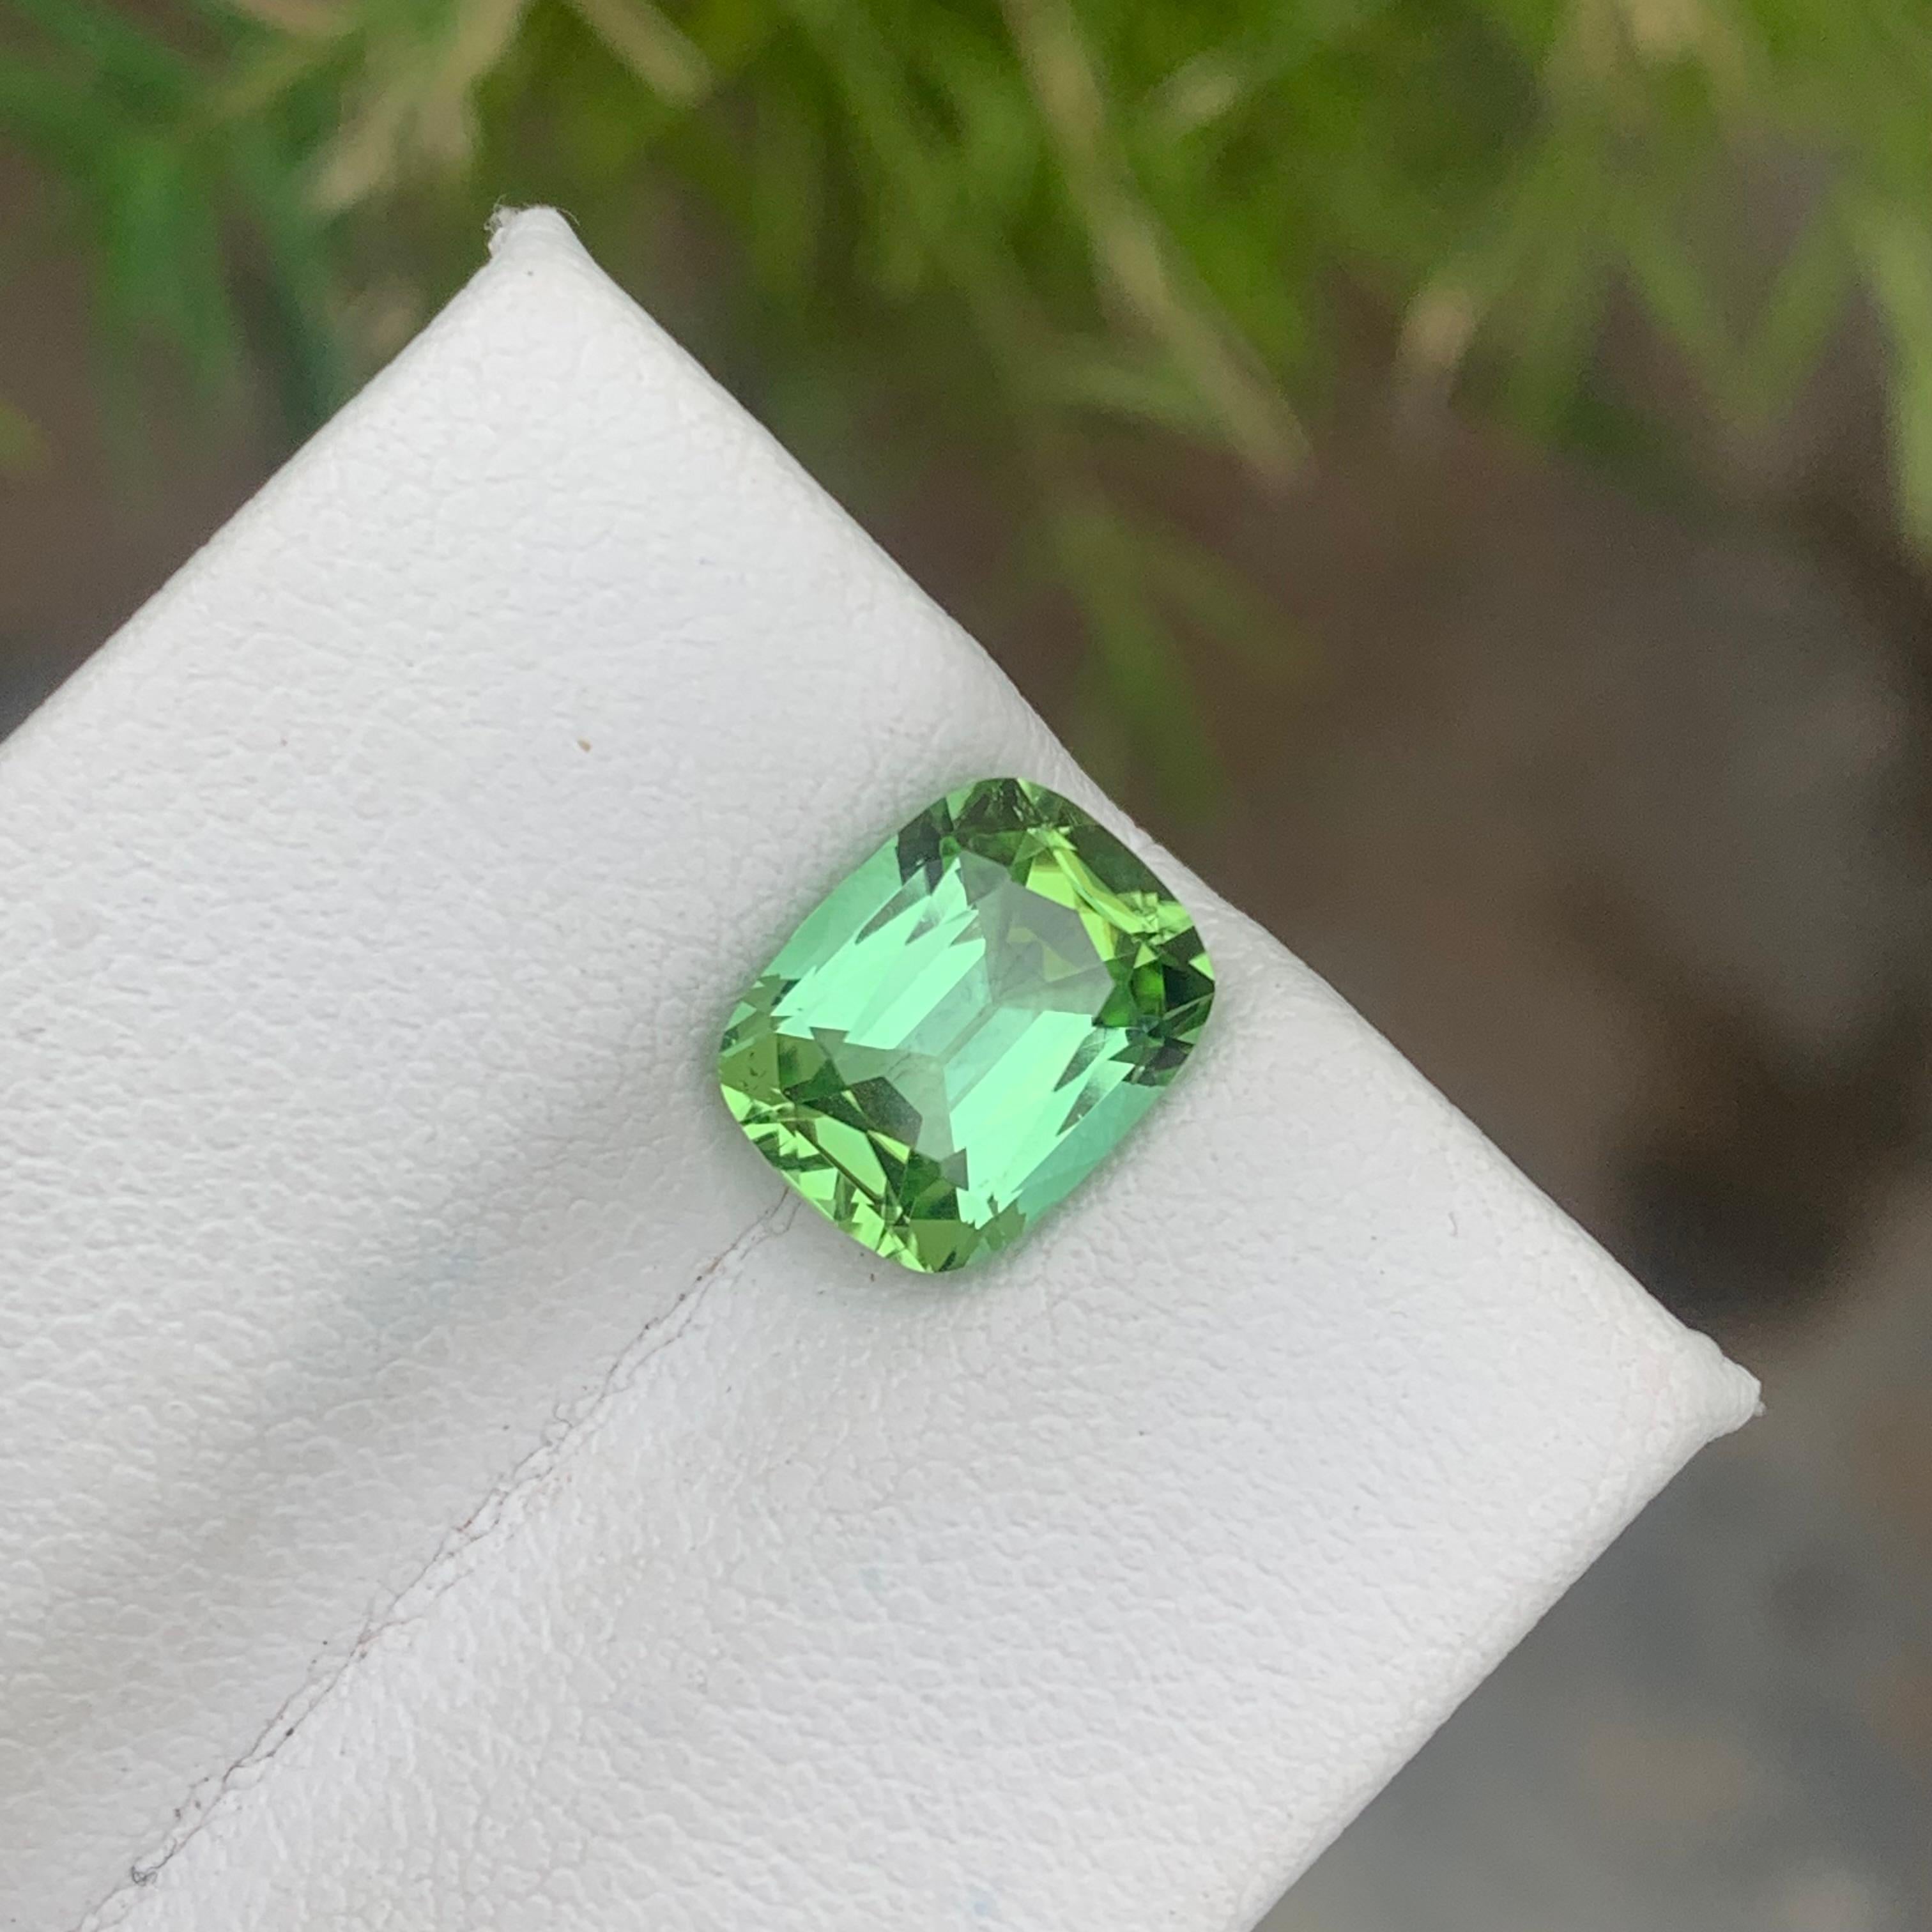 Stunning 2.65 Carat Natural Loose Tourmaline Ring Cushion Cut From Afghanistan For Sale 8